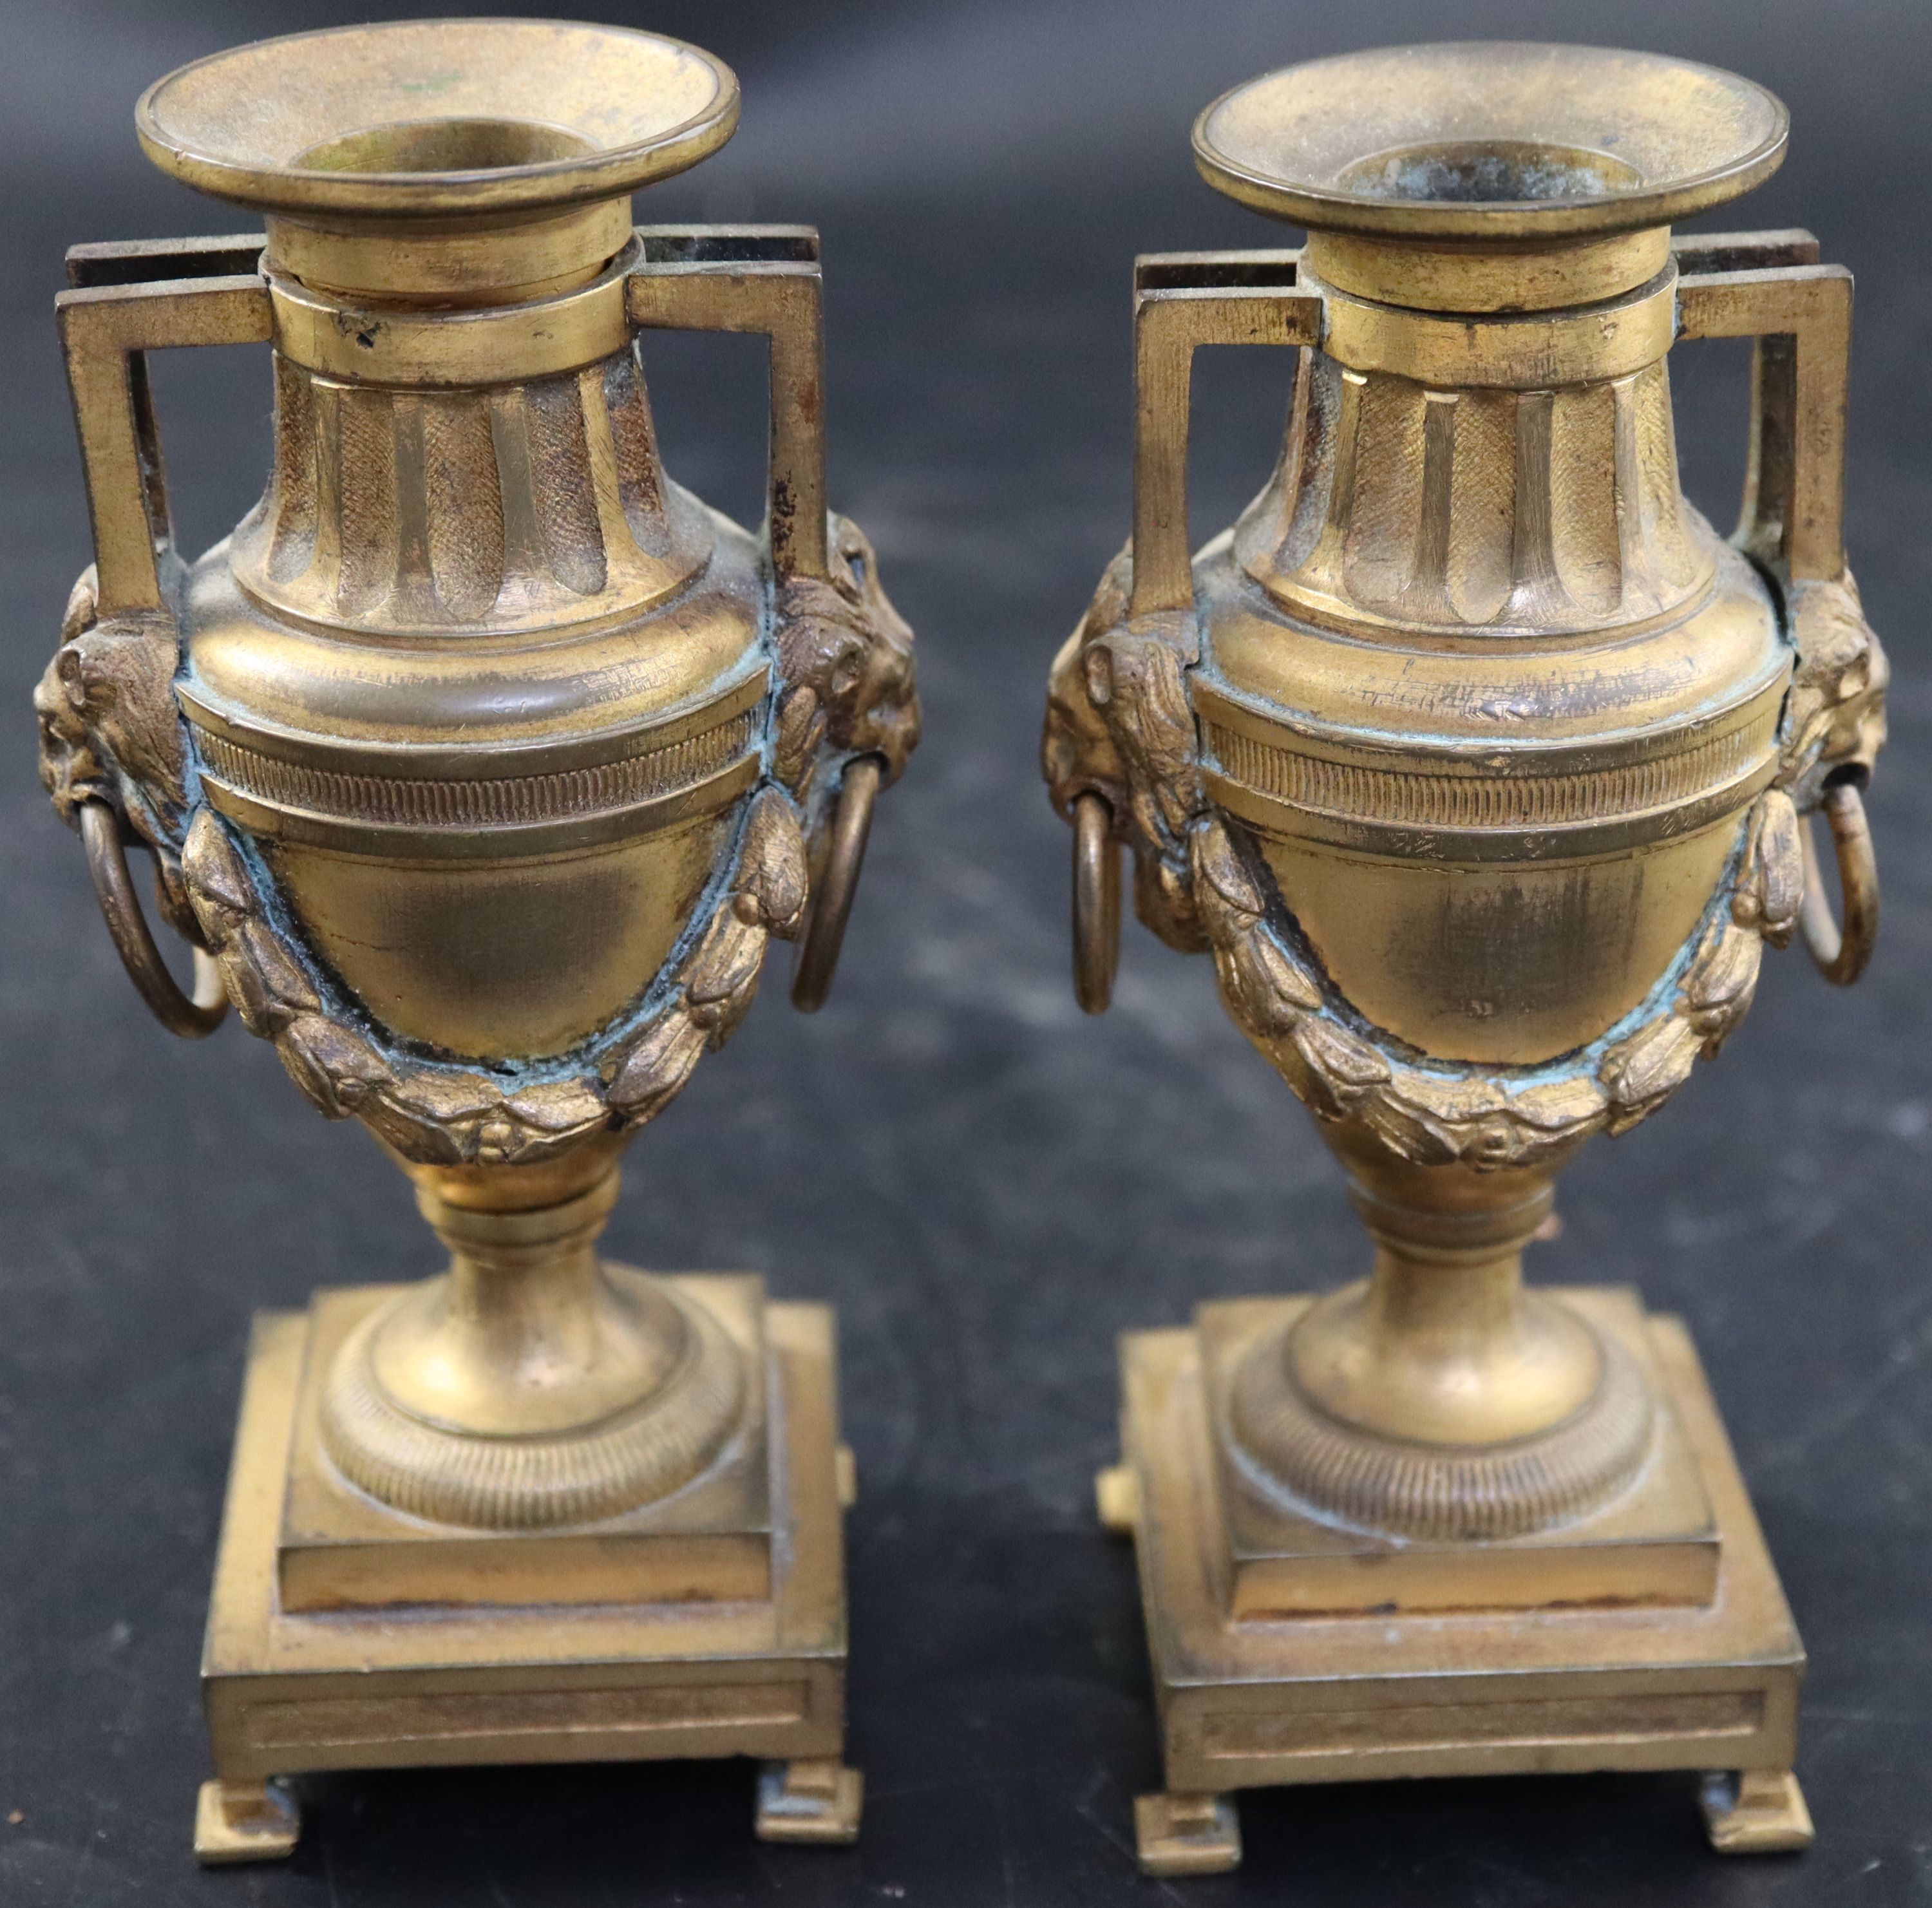 A pair of 19th century French ormolu urn shaped candlesticks, height 15cm